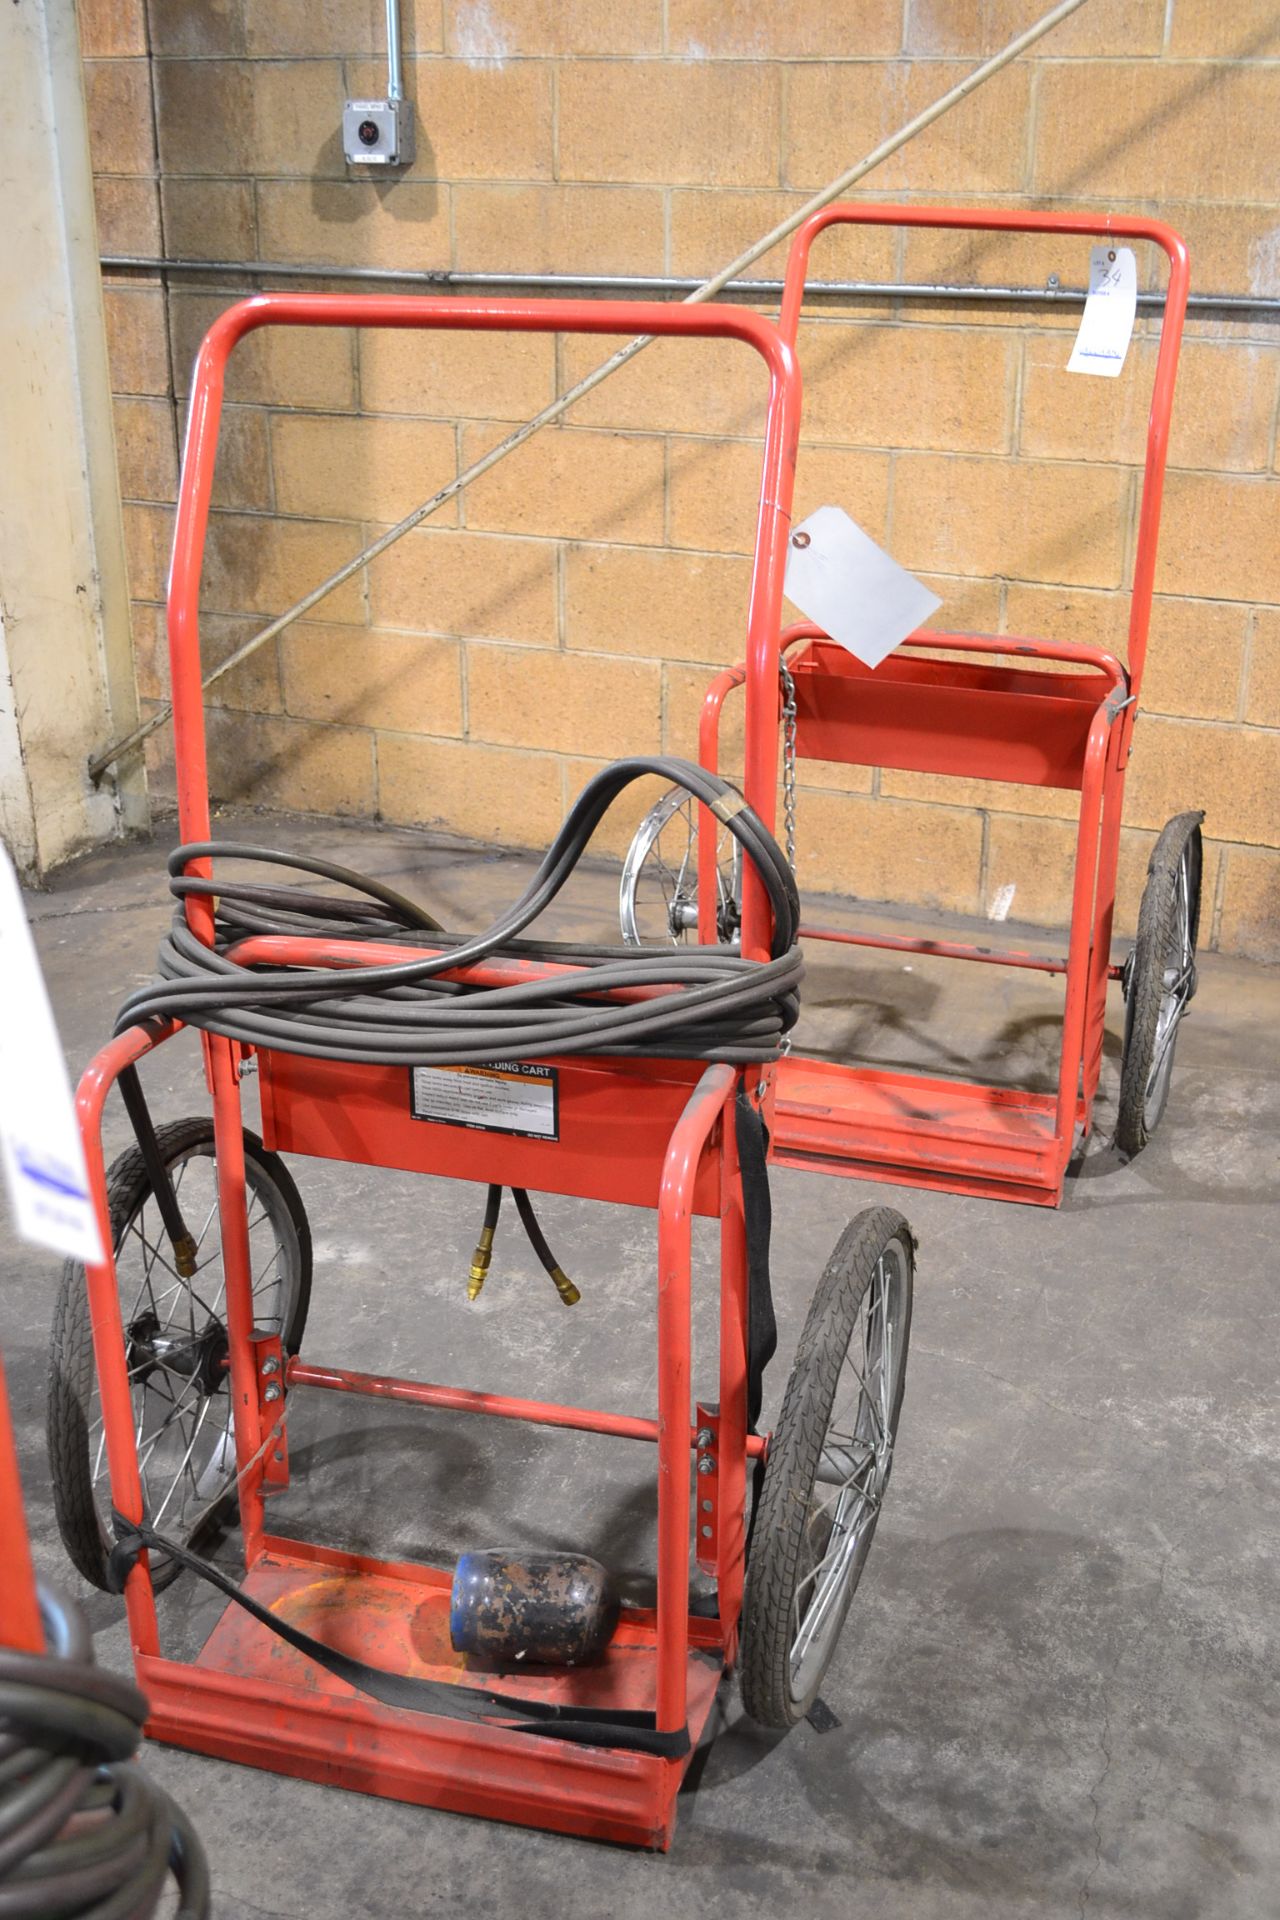 ACETYLENE TORCH CART, W/ HOSES AND EXTRA TORCH CART